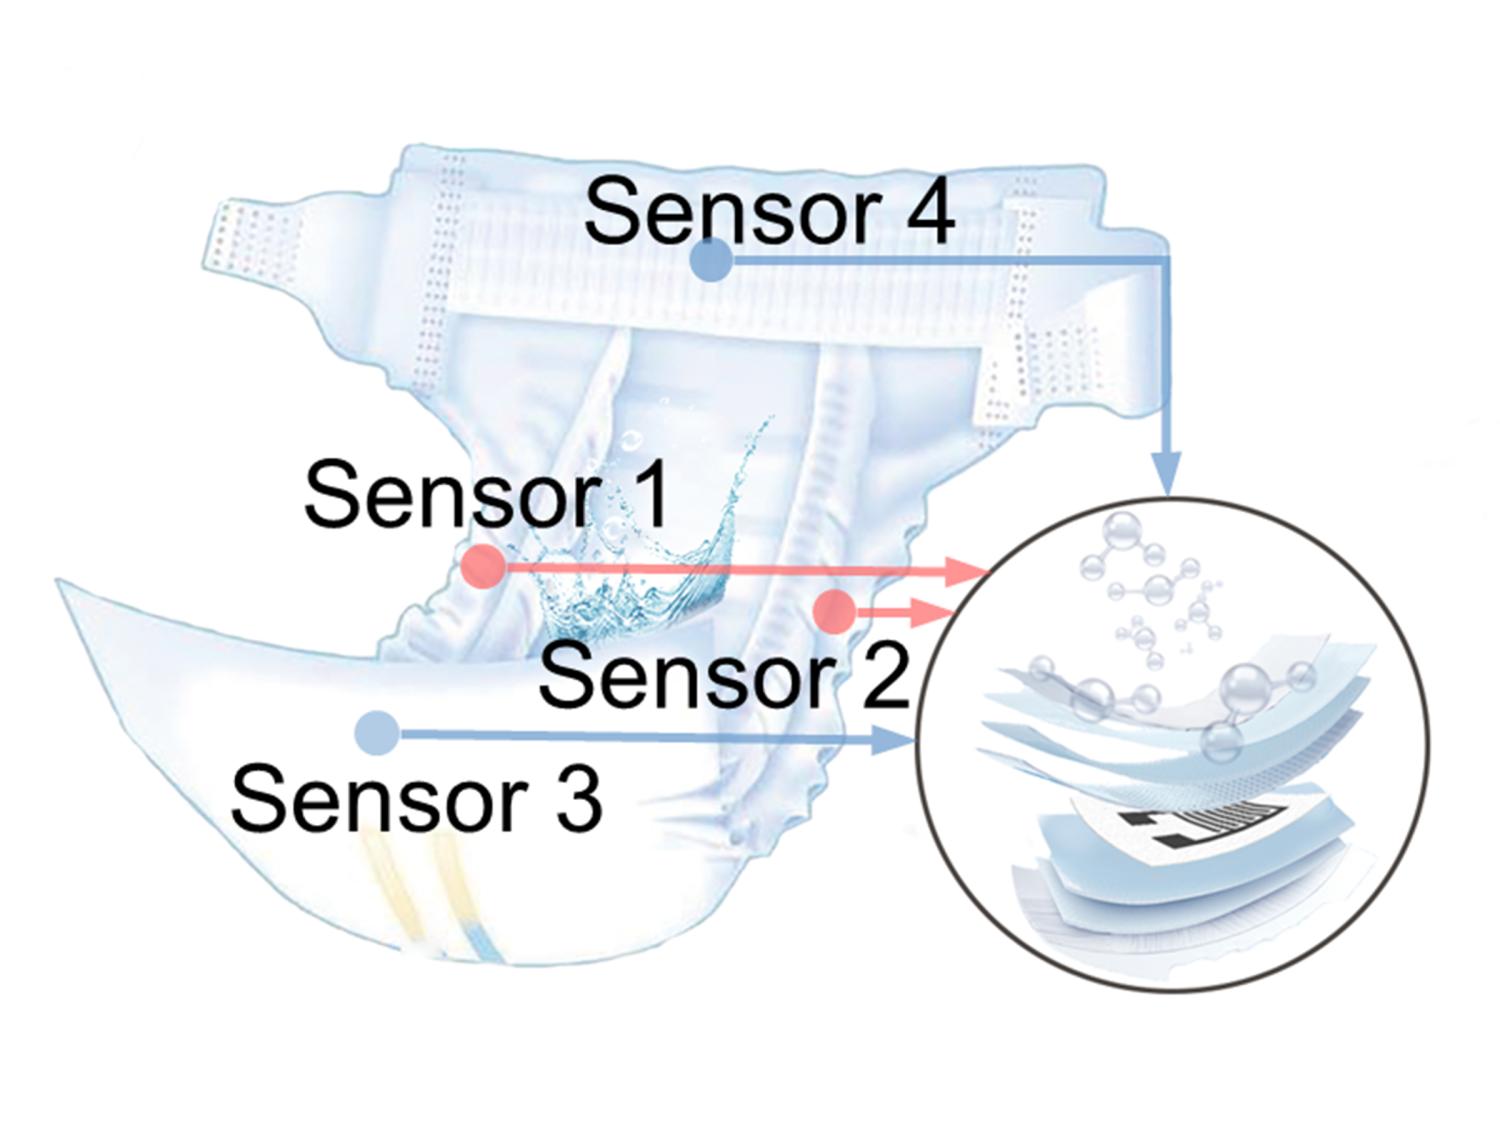 A graphic showing a diaper and then the layers of sensors inside via an inset.